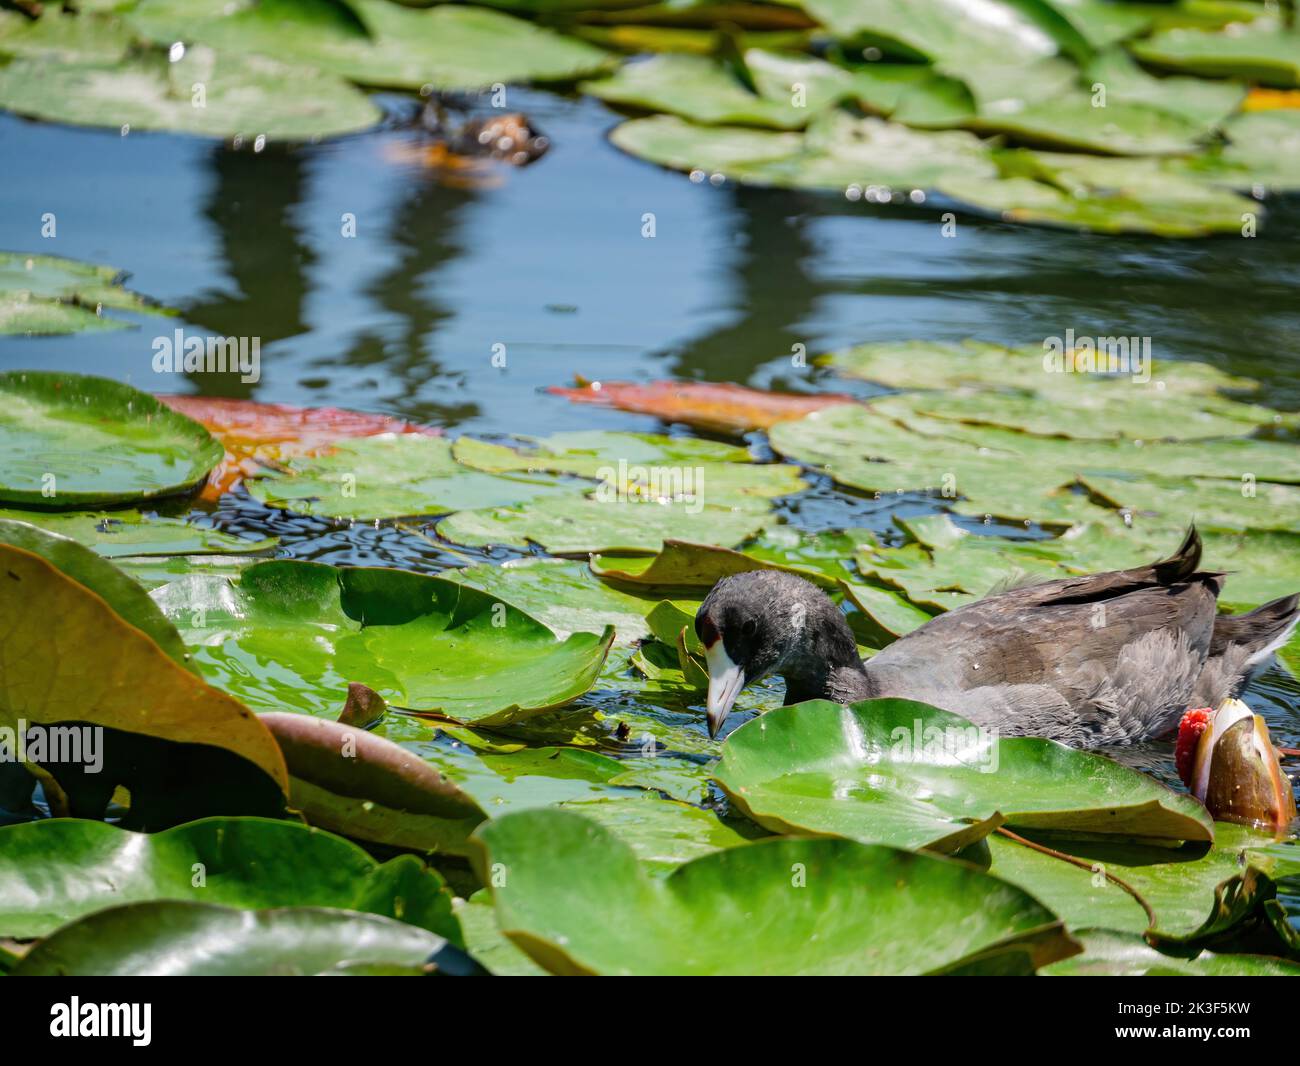 Close up shot of American coot in the Echo Park Lake at Los Angeles, California Stock Photo